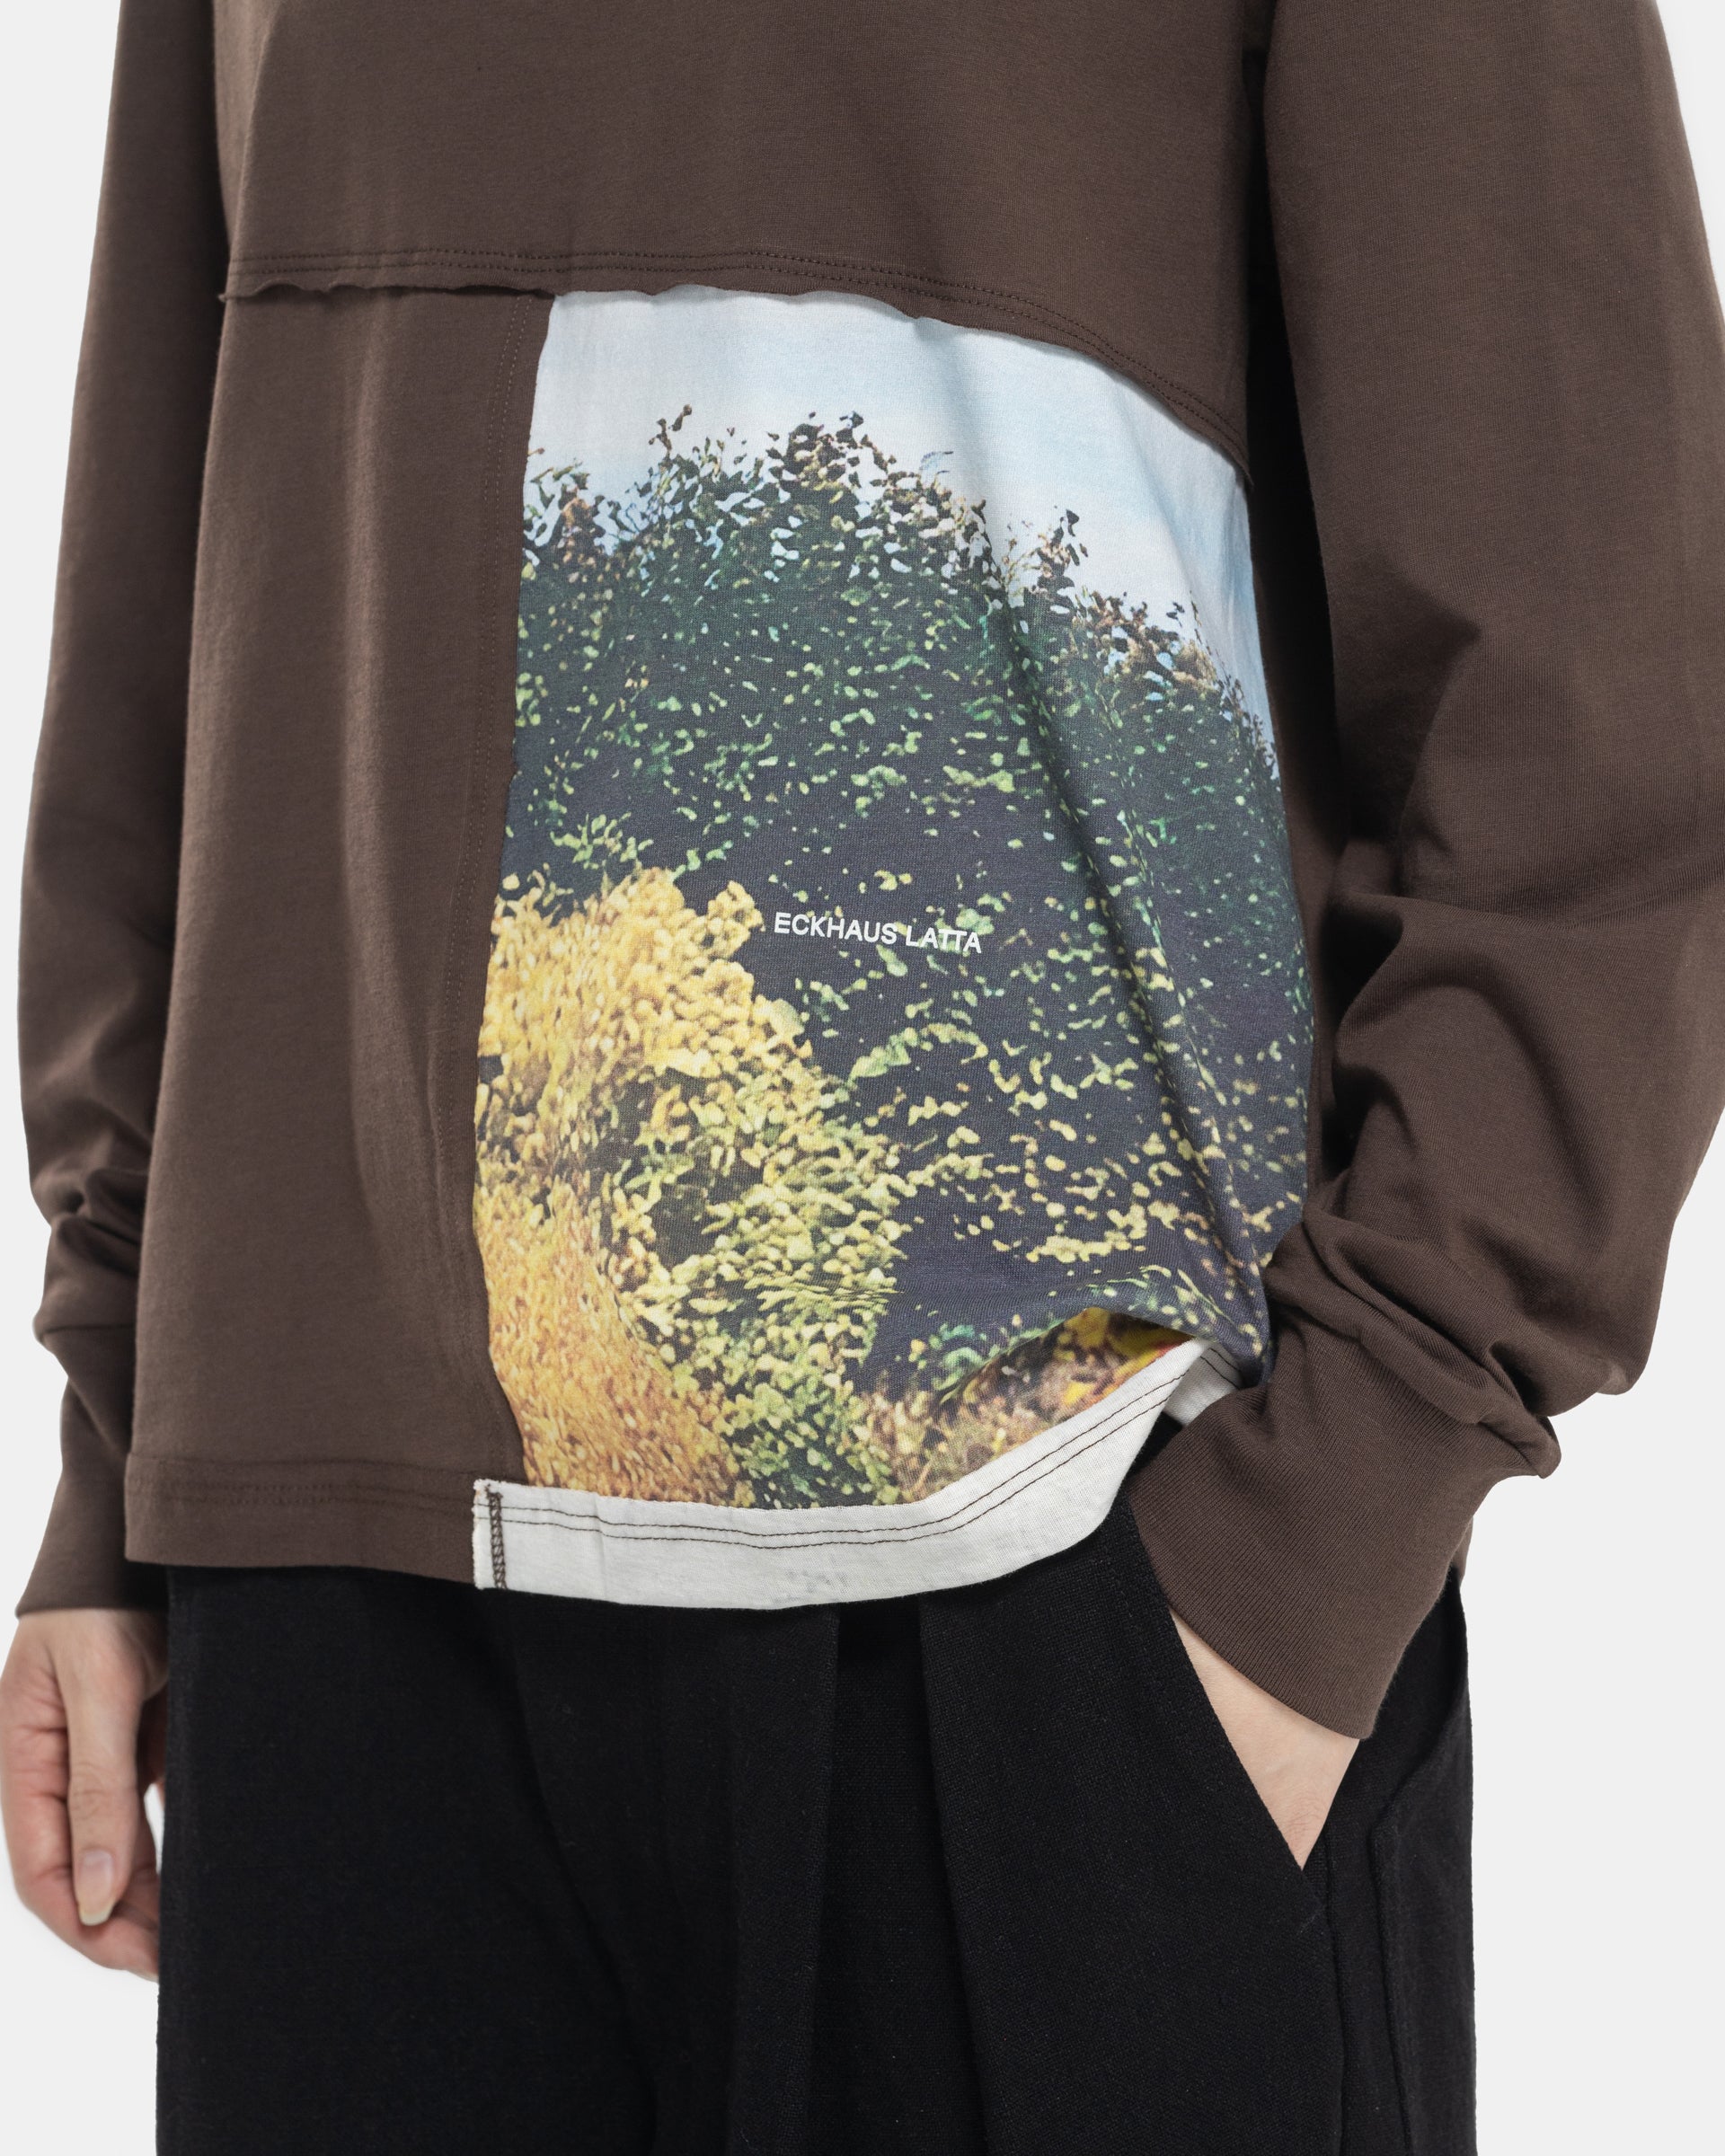 Brown Eckhaus Latta Lapped Longsleeve T-shirt with a printed design.